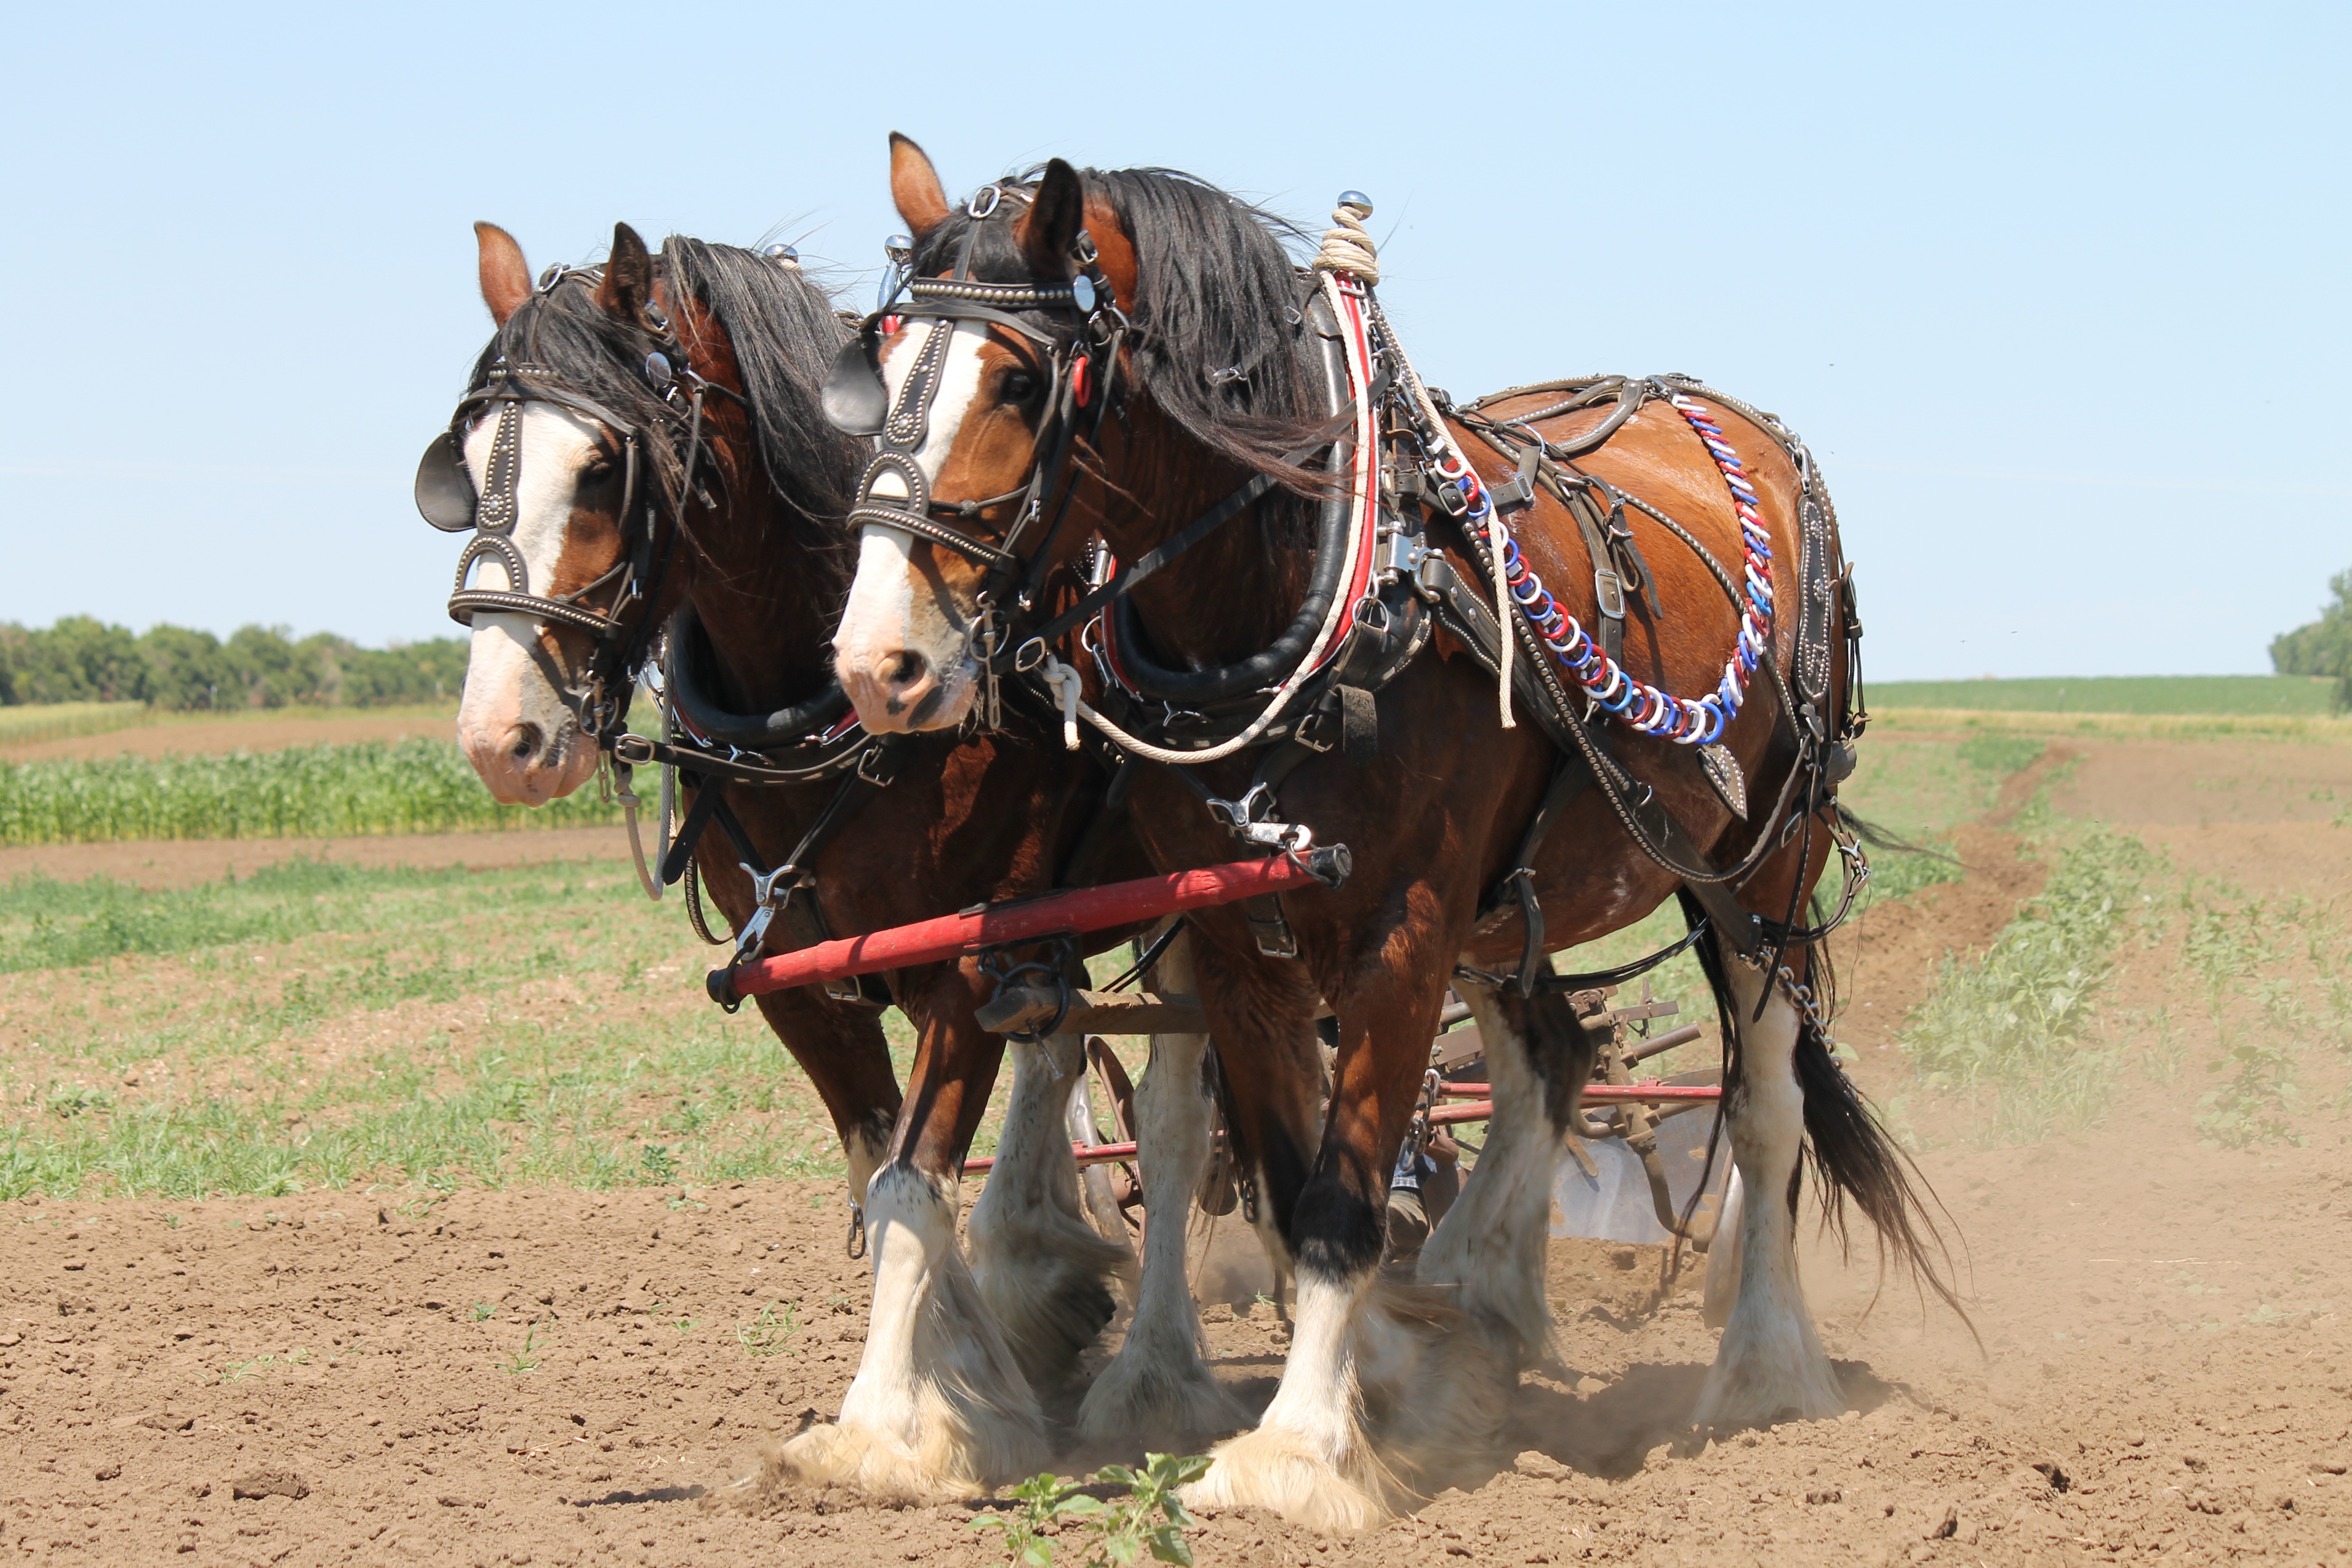 Clydesdale farm photo